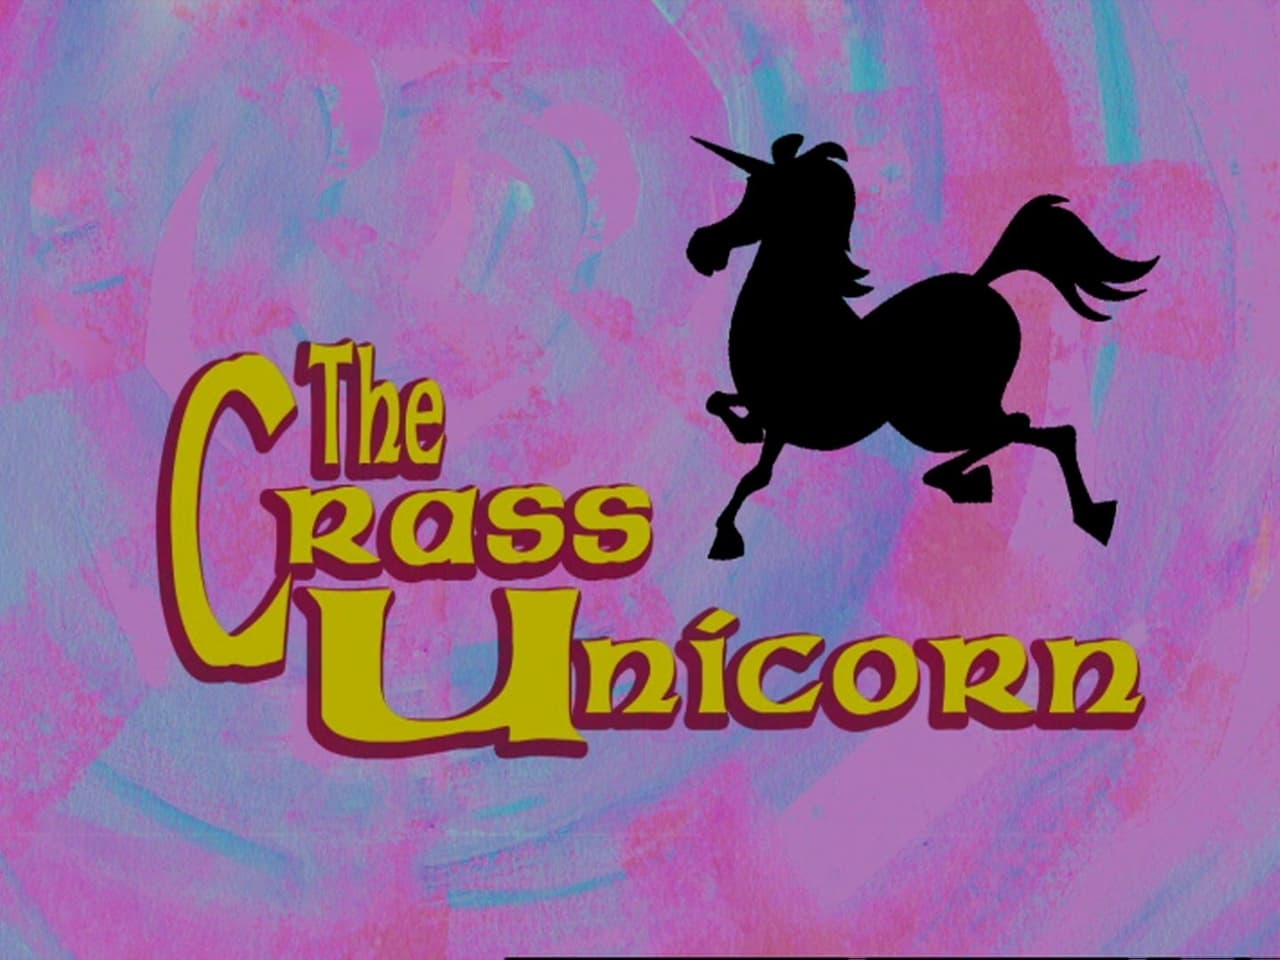 The Grim Adventures of Billy and Mandy - Season 6 Episode 23 : The Crass Unicorn